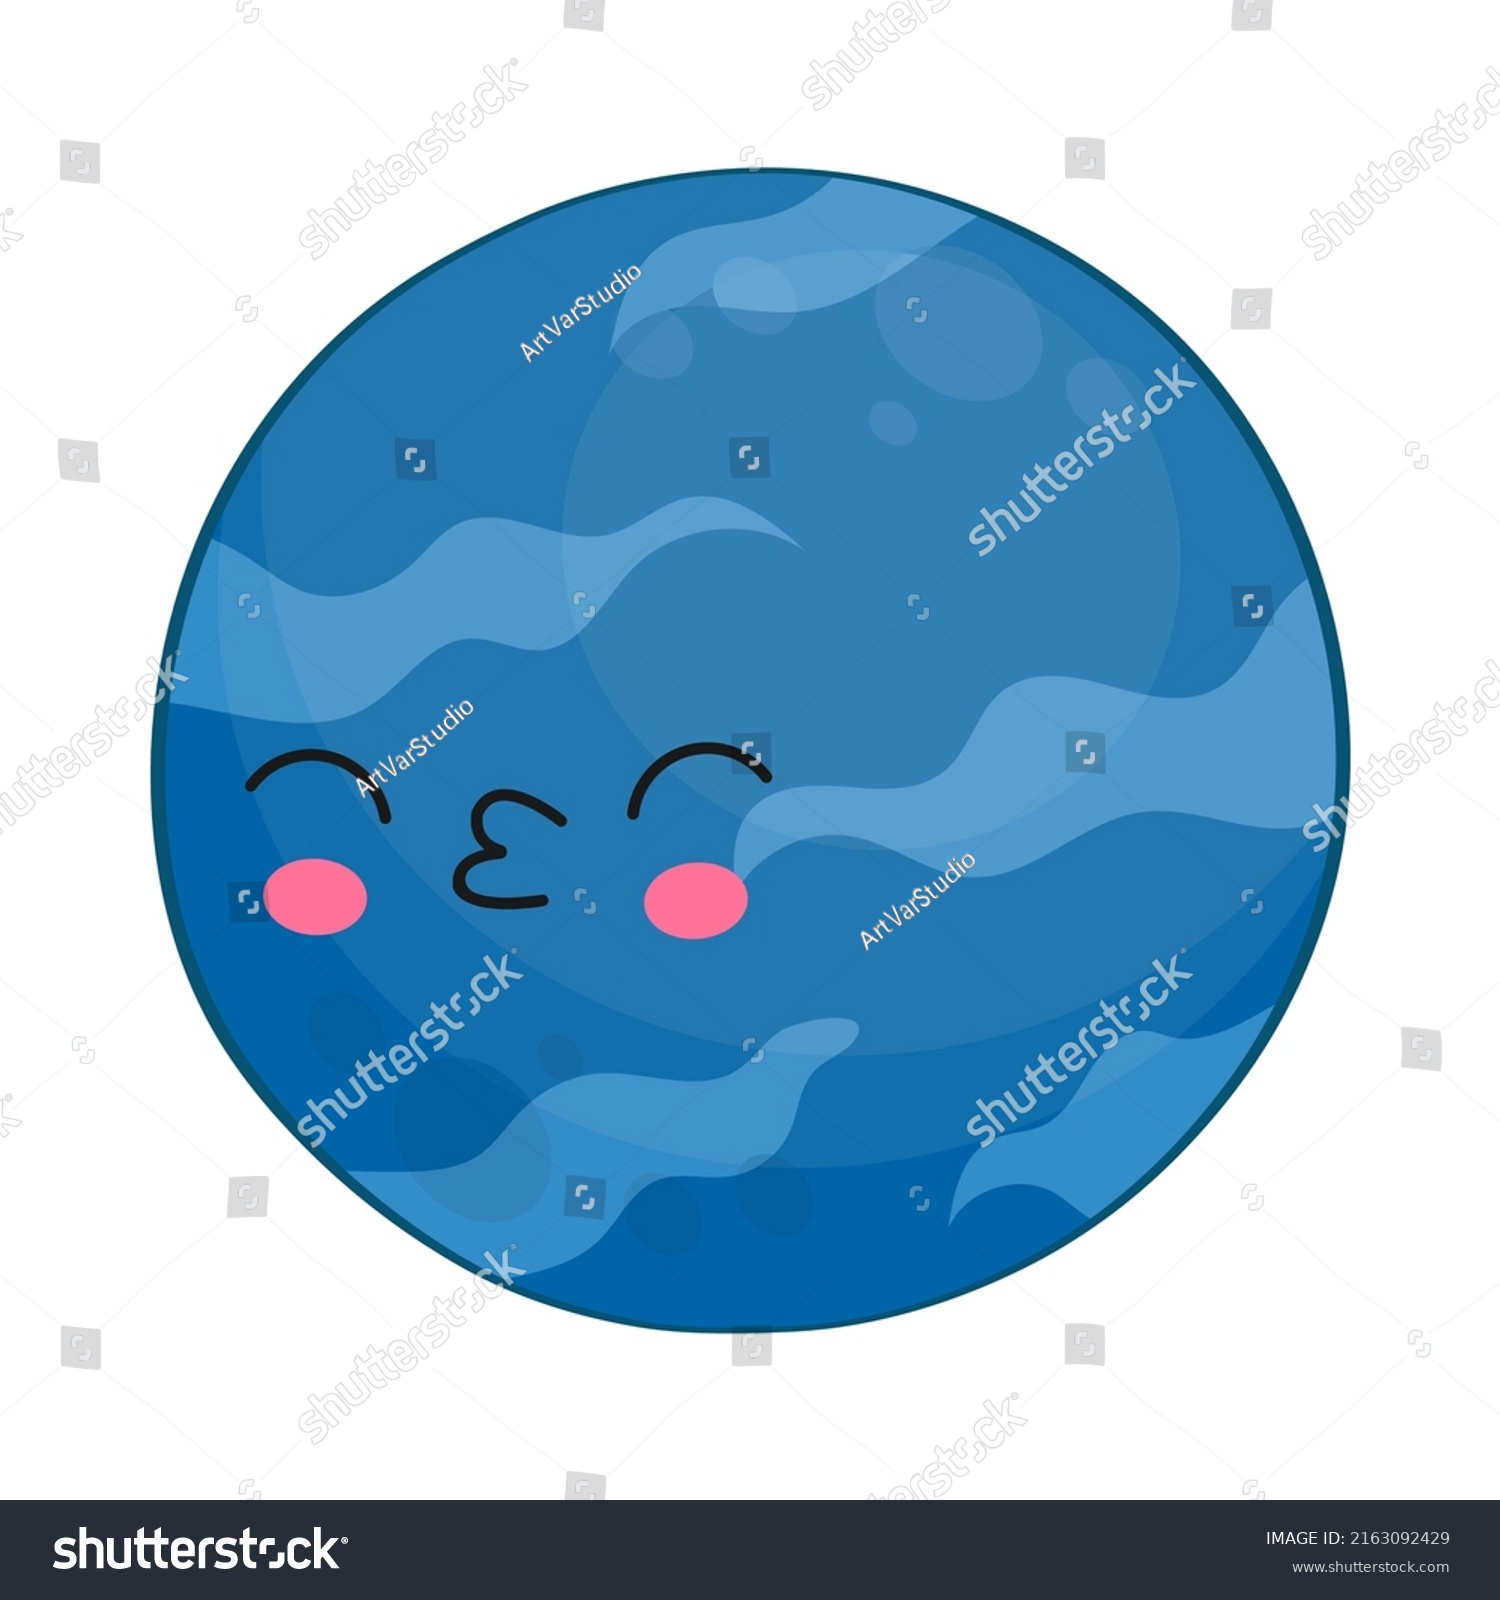 SVG of Cute kawaii planet Neptune Vector illustration of a planet. Picture of planet for kids, baby book, fairy tales, covers, baby shower invitation, textile t-shirt.
 svg